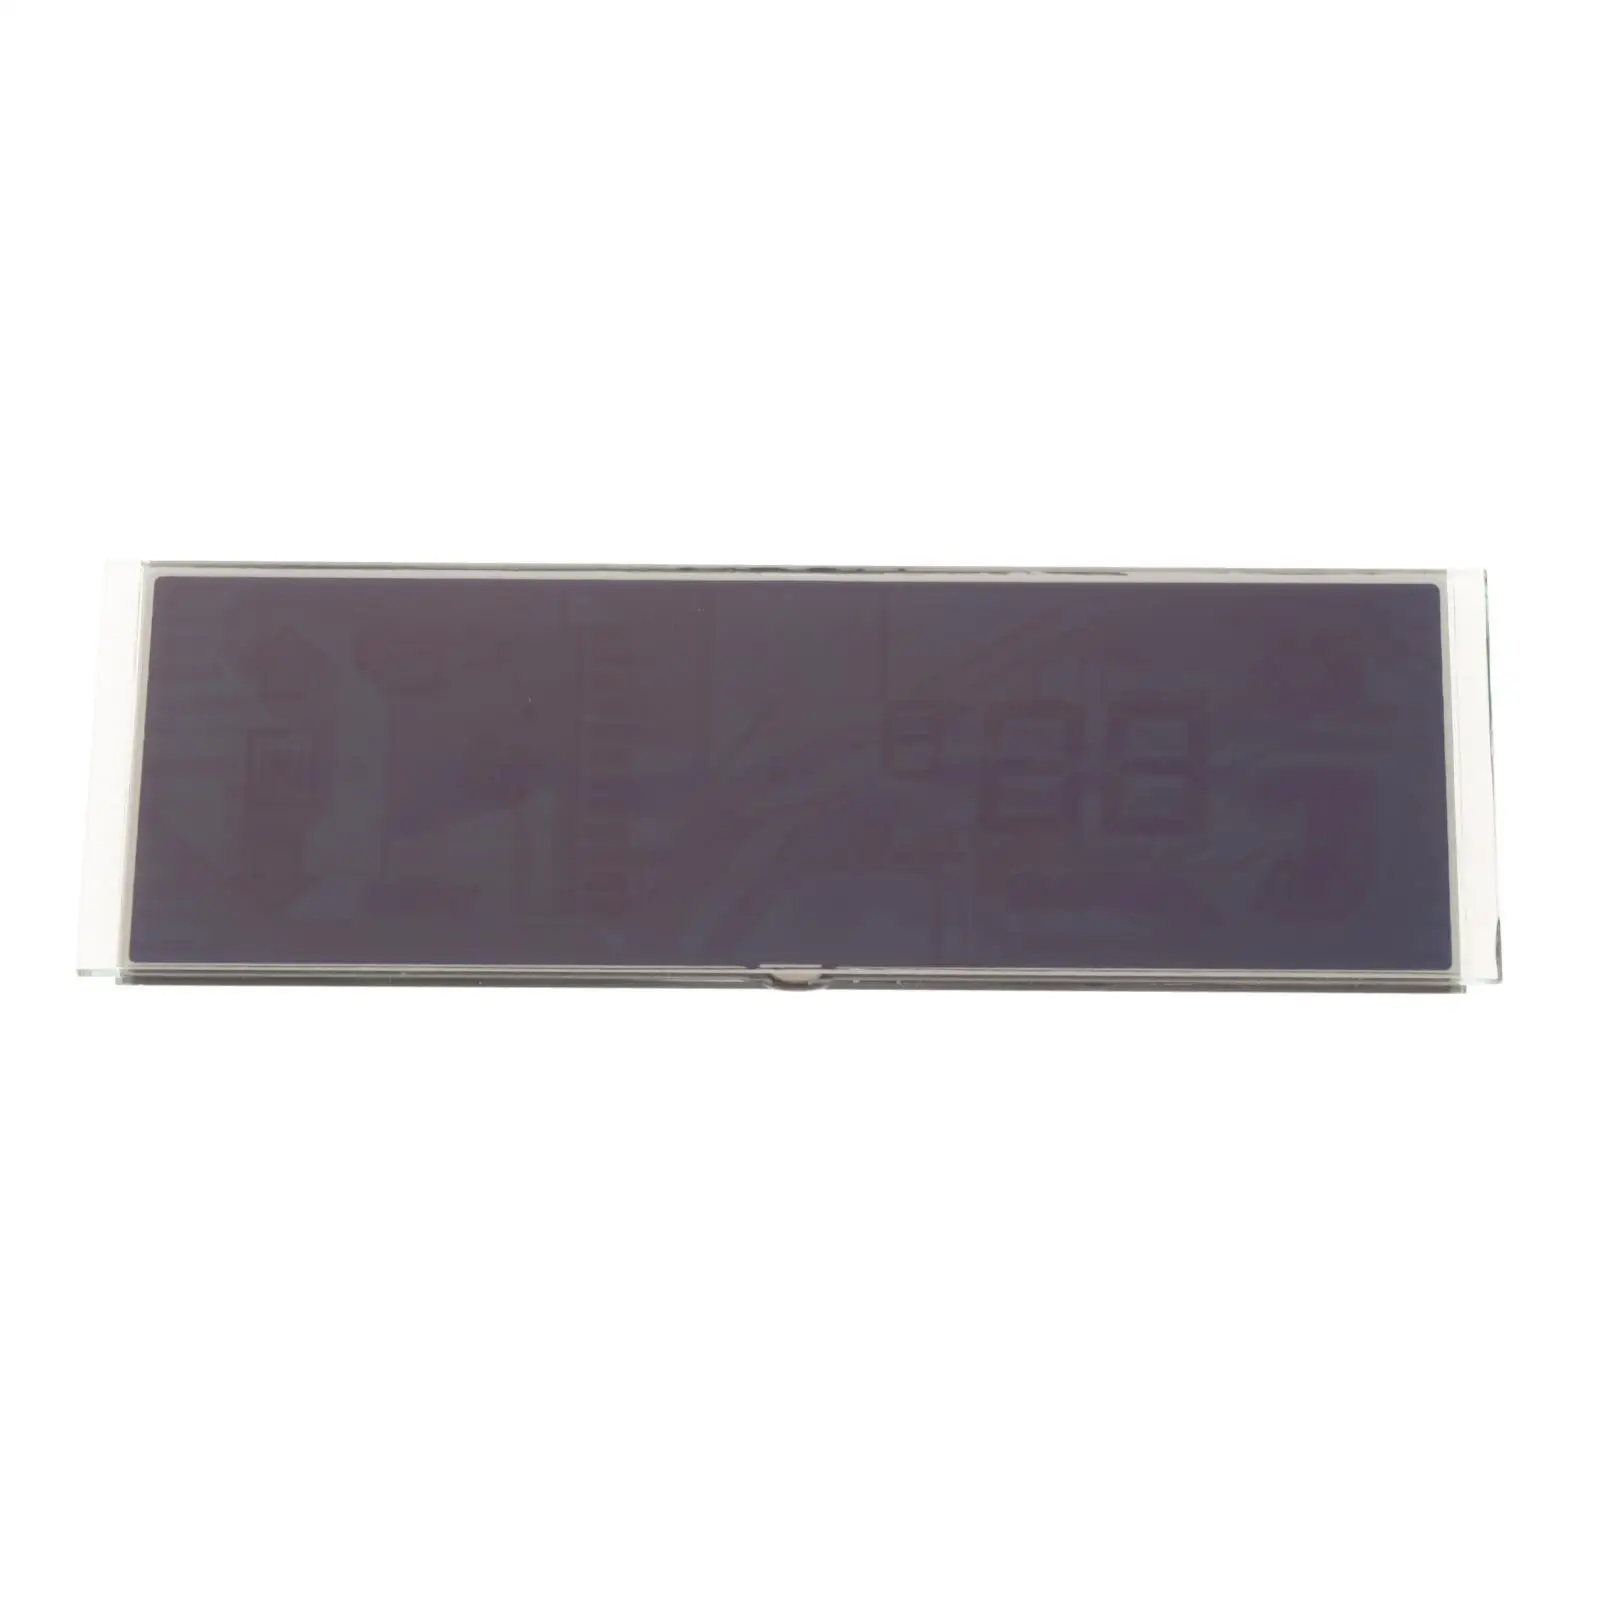 Display Repl ement for  911 996 Ruf Climate Control Unit